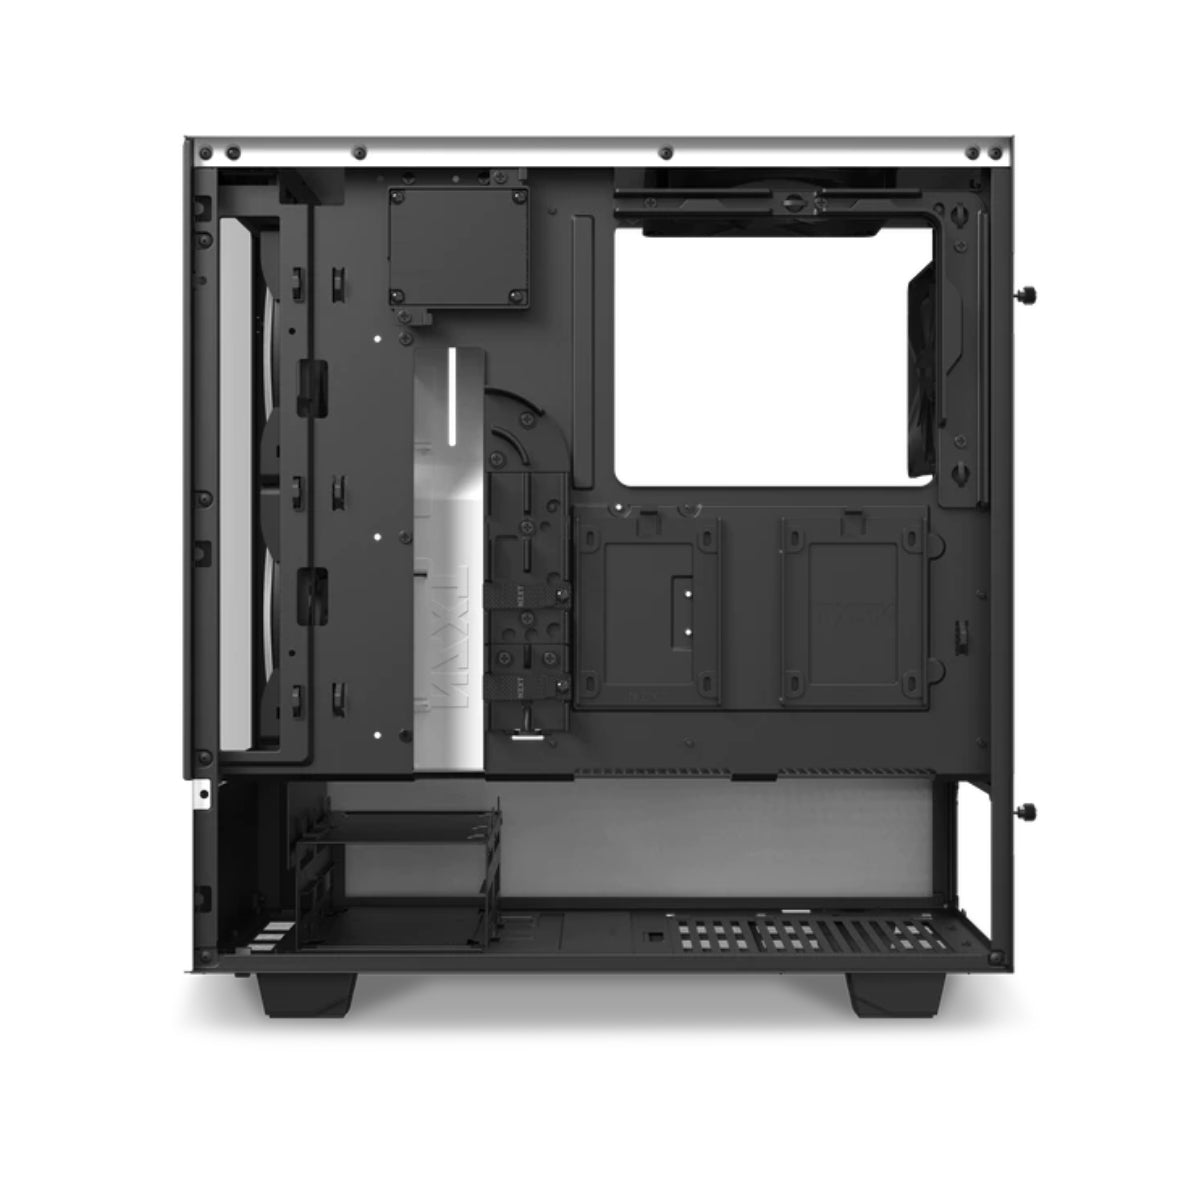 NZXT H510 Elite ATX Mid Tower Case - White - Store 974 | ستور ٩٧٤